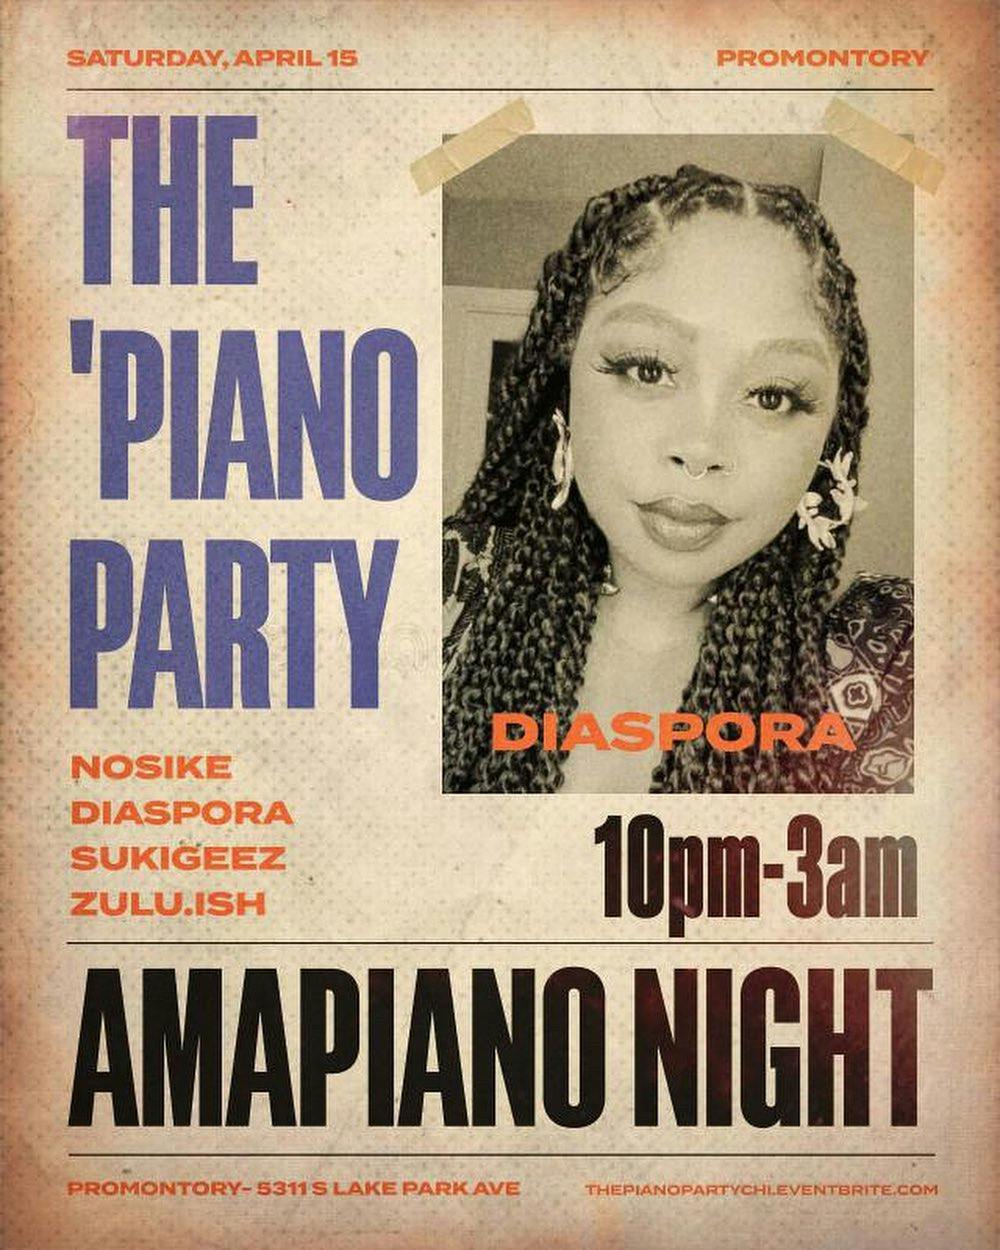 🪩 big mood 🎹🇿🇦 with @nosikelive, @zulu.ish + @sukigeez at @promontorychicago! Piano people, RSVP free before 11pm at the link in bio!  
  
Brought to you by @dottdaley x @afropolitaninsights x @mo_gwala   
  
🎨 @pvo_graphics  
  
#amapiano #prettygirlsloveamapiano #amapianodj #amapianochicago #chicagoamapiano